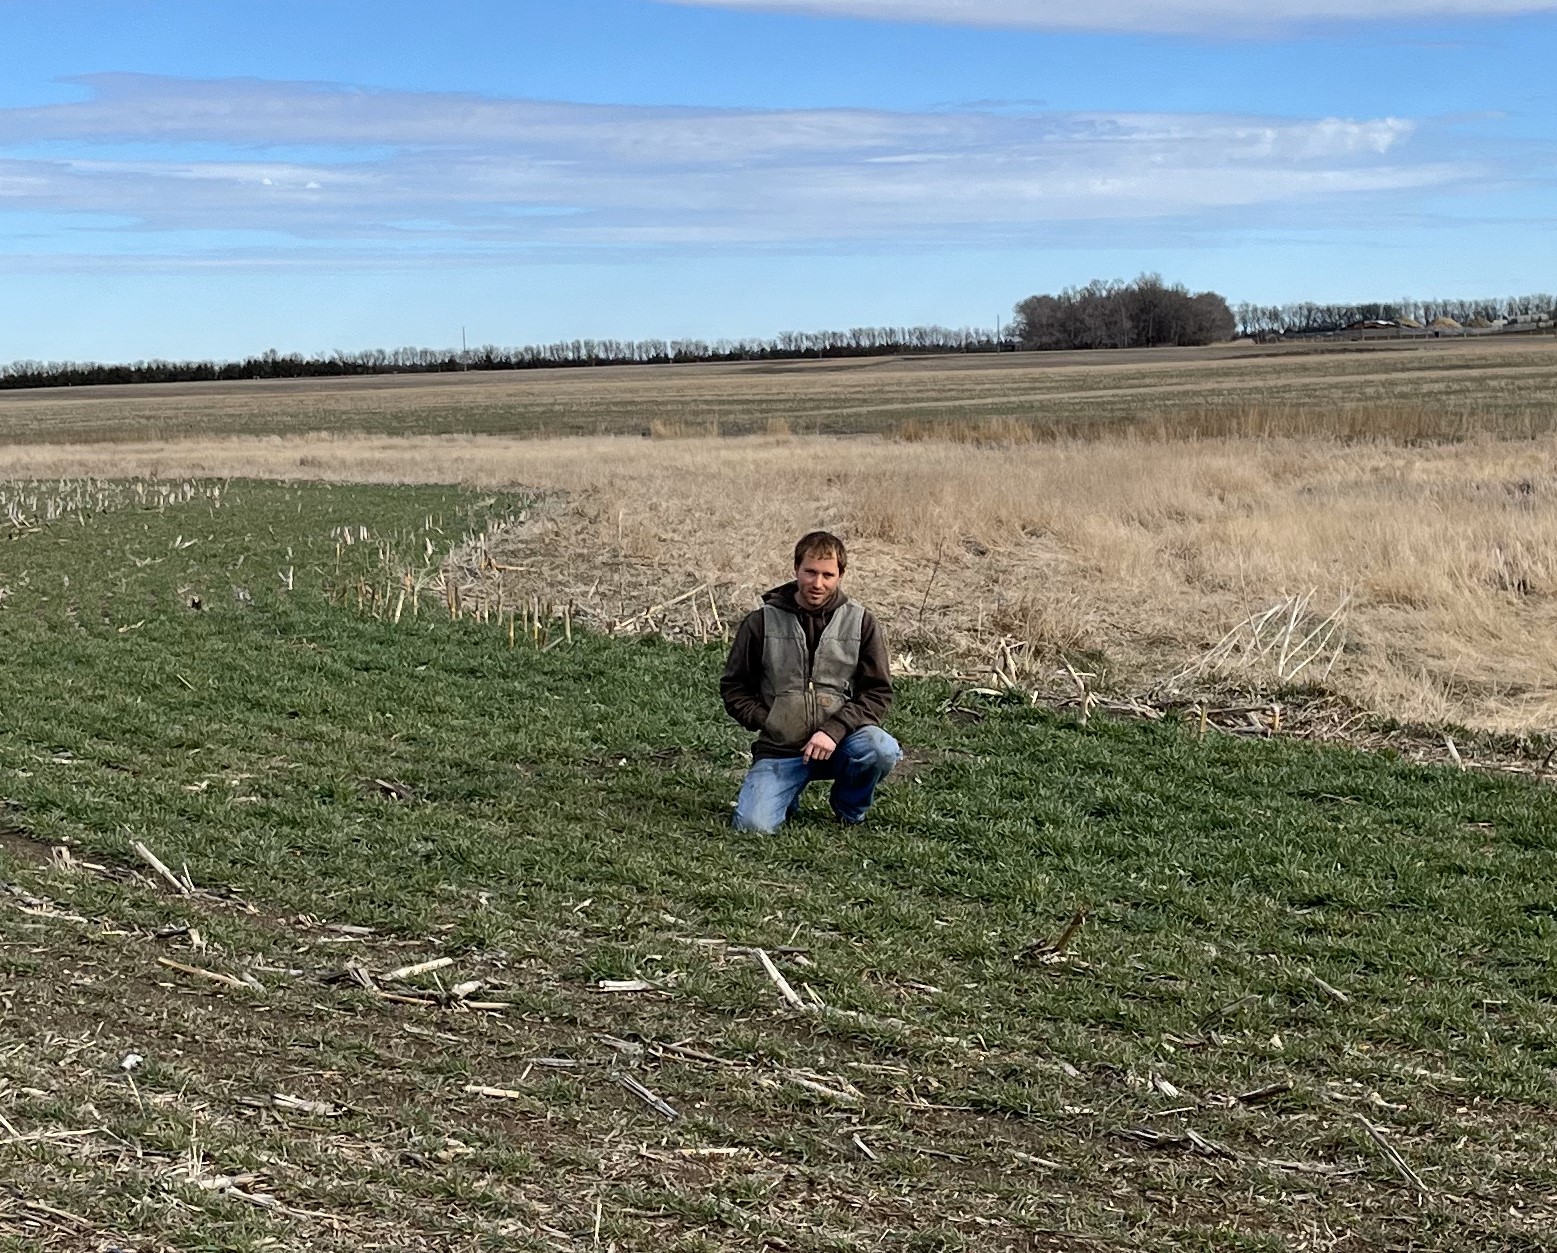 SustainAg Network Connects Farmers & Ranchers with Funding for Producer-Led Conservation Practices